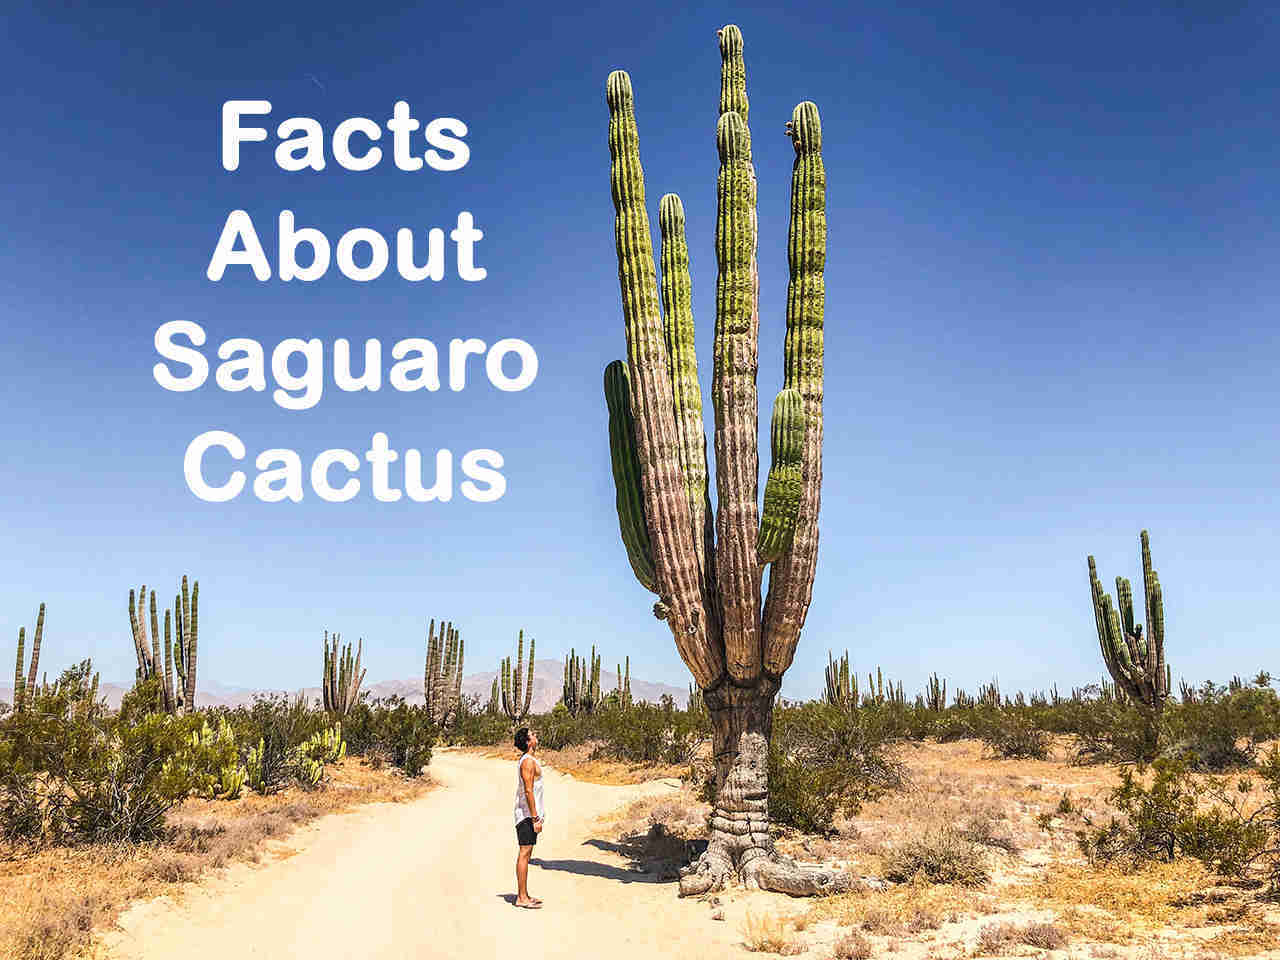 8 Facts About Saguaro Cactus Topessaywriter